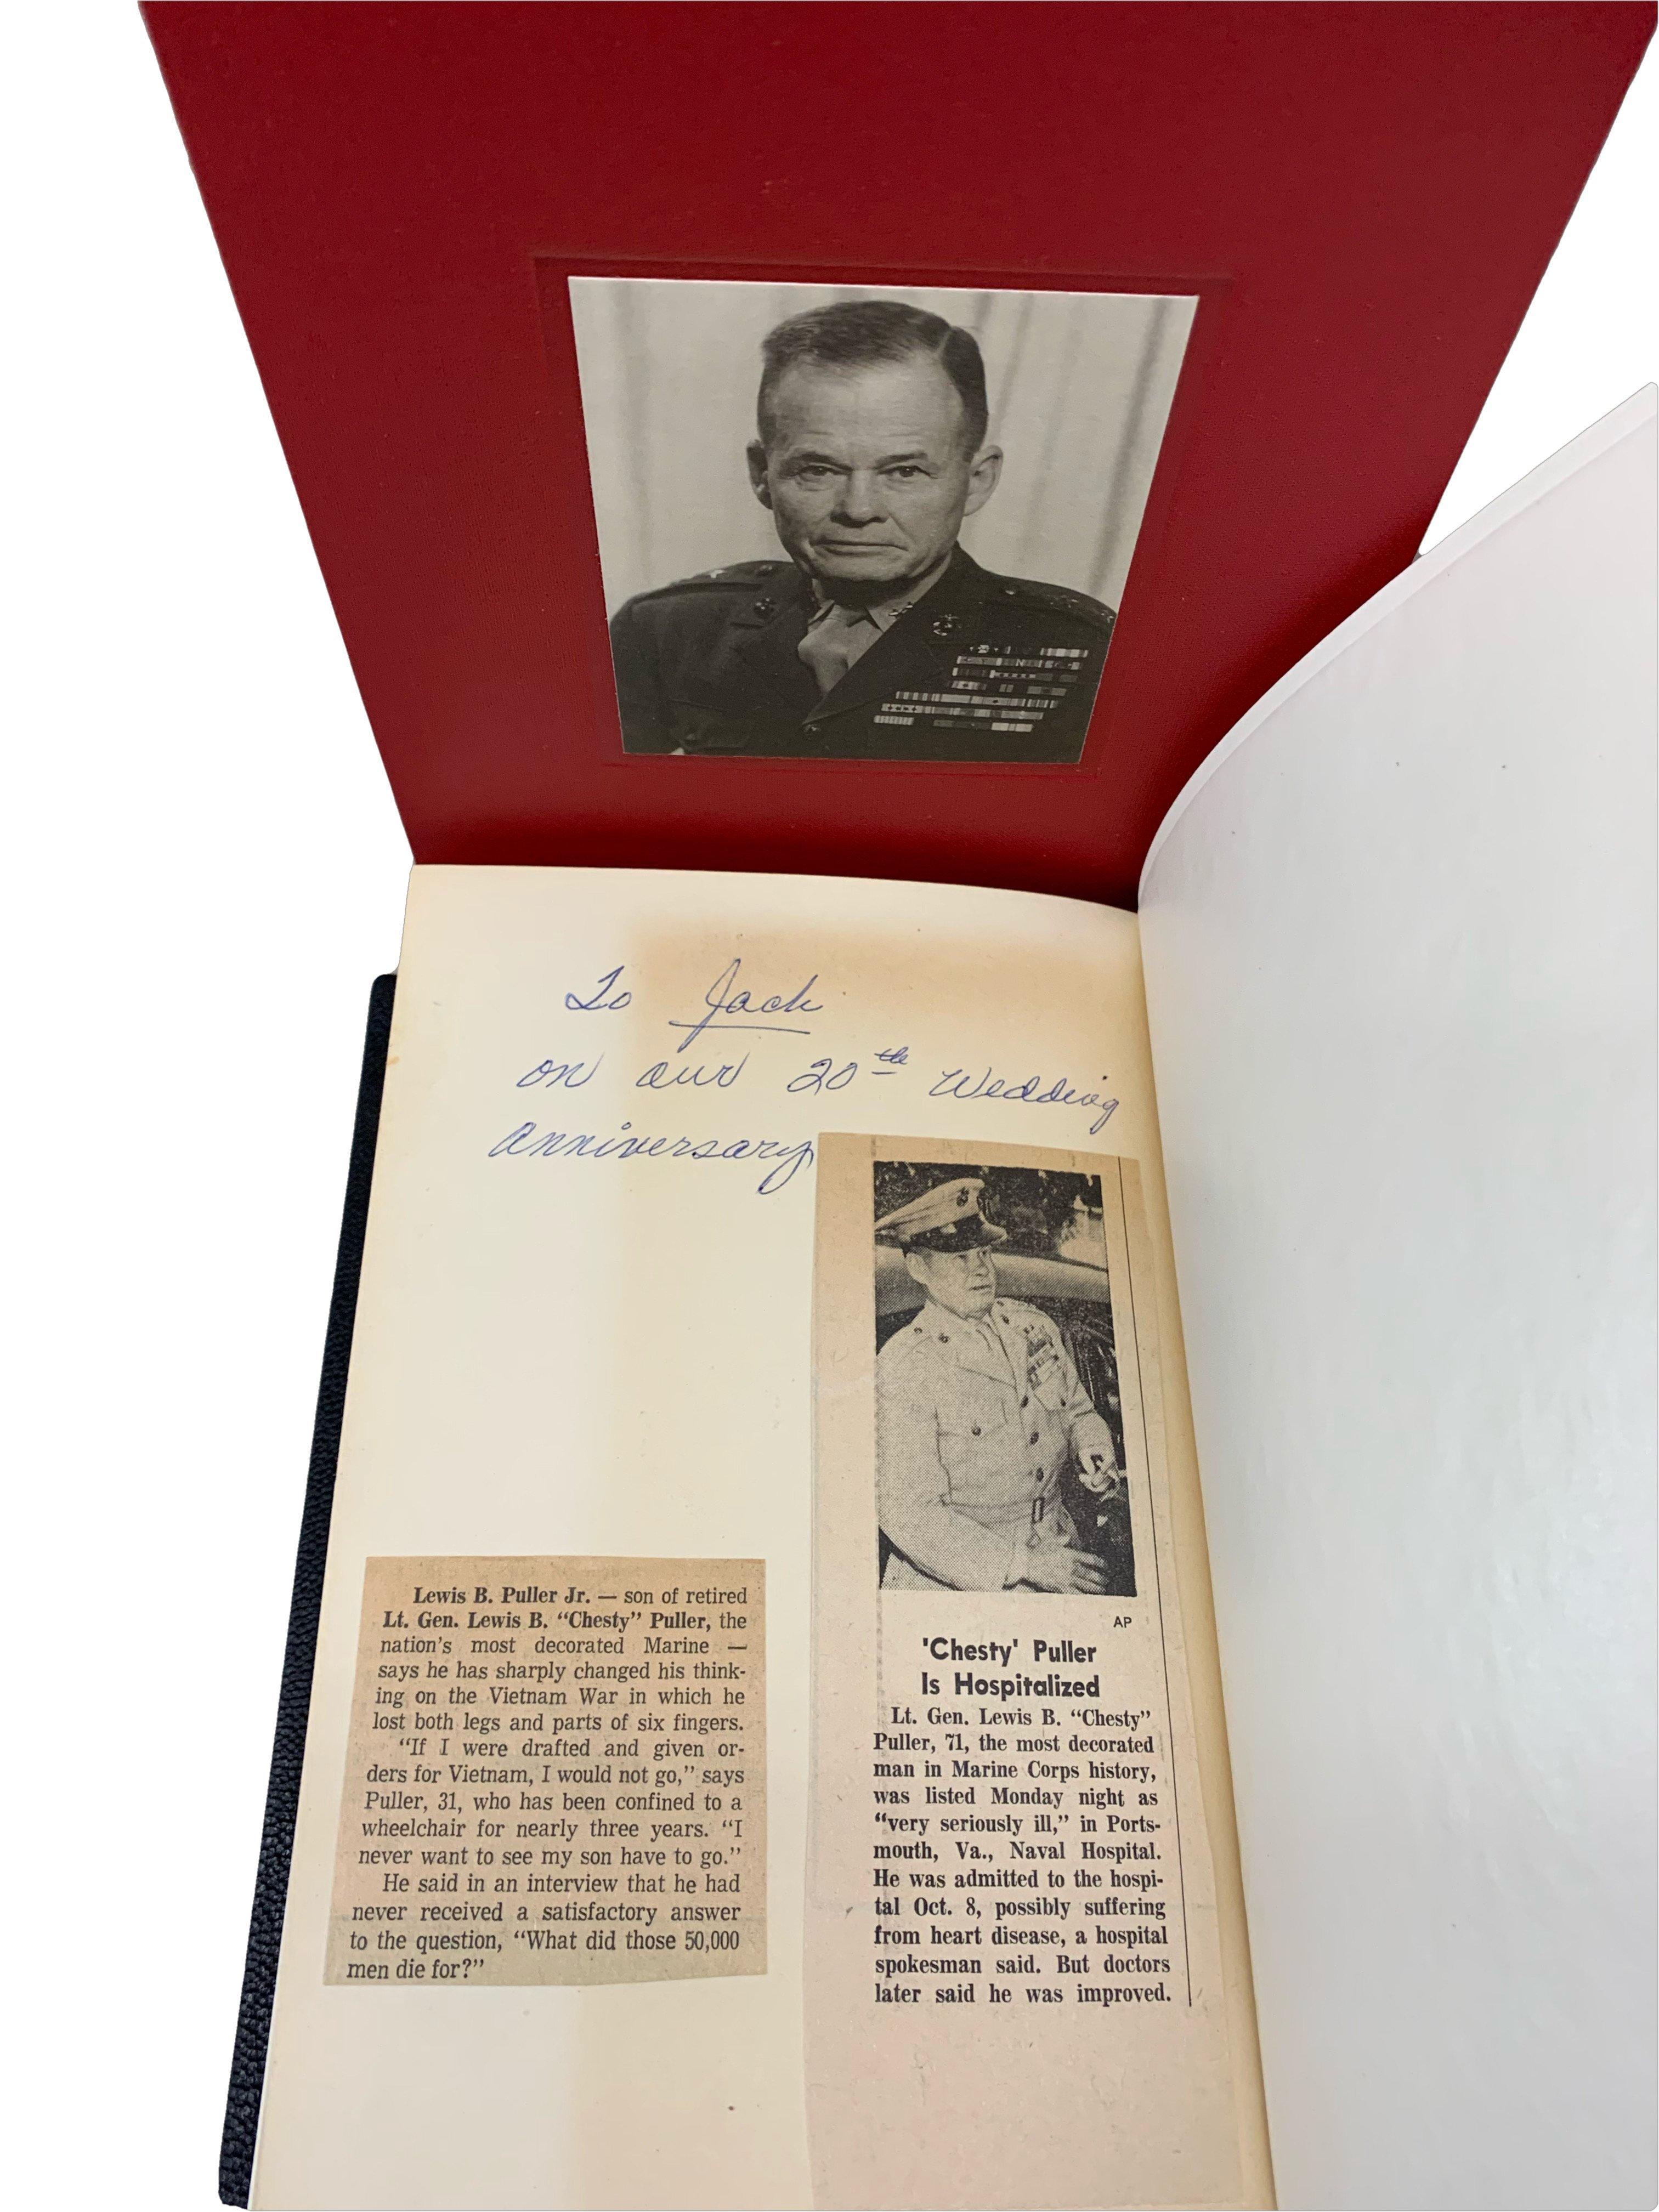 Leather Marine! The Life of Chesty Puller by Burke Davis, Signed by Chesty Puller, 1962